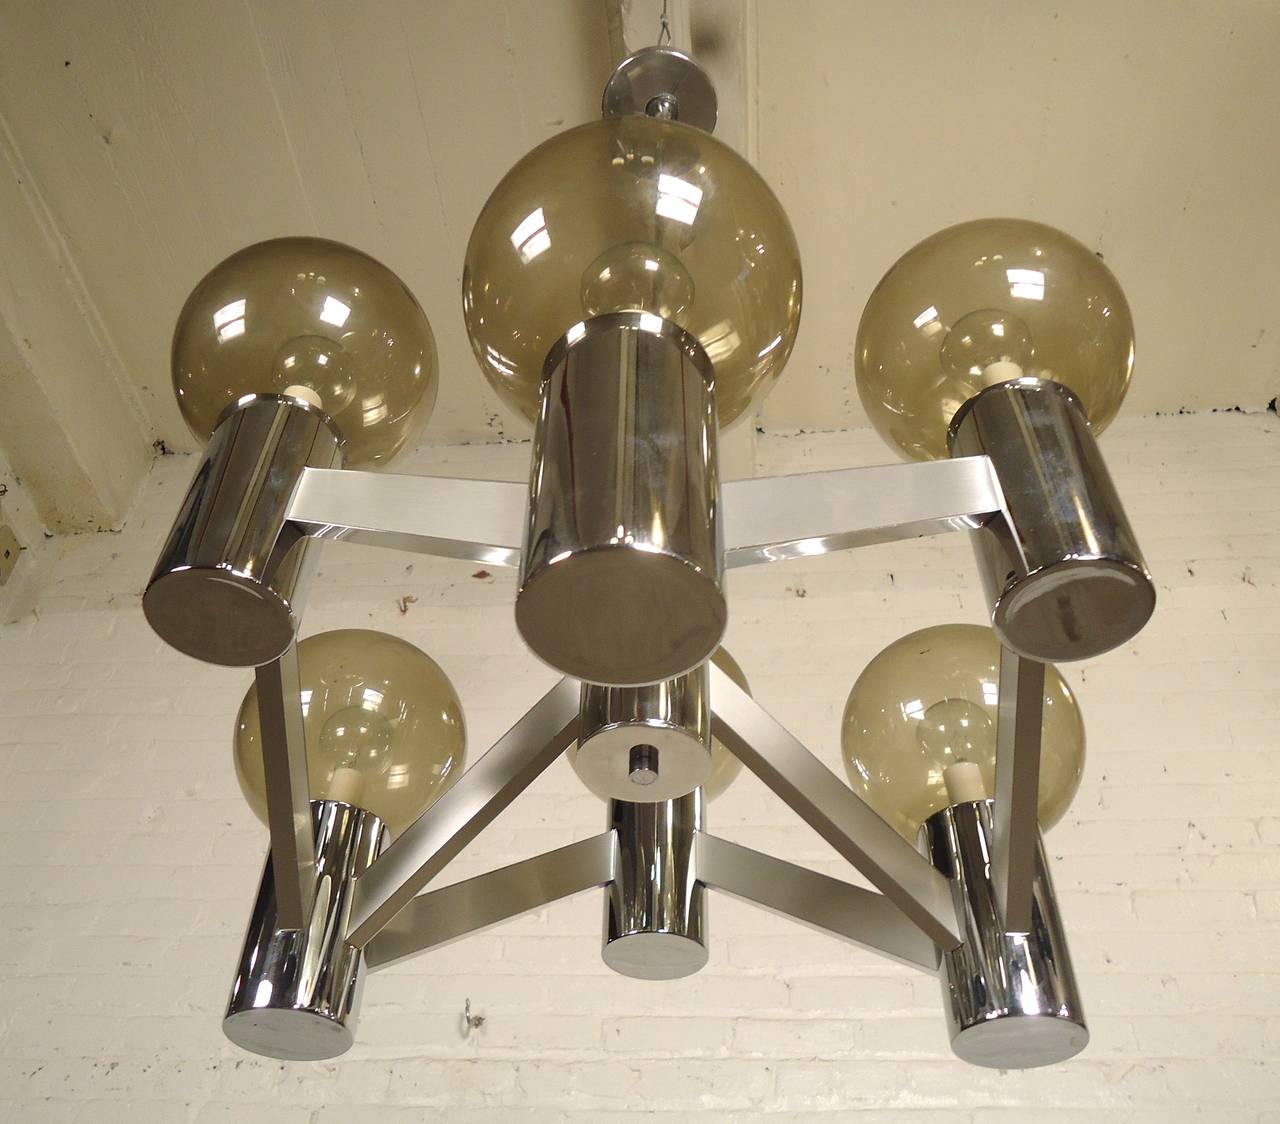 Unique vintage modern style chandelier featuring both polished and matte chrome with six smoked glass globes. Long chrome tube to the top ceiling flush mount.

(Please confirm item location - NY or NJ - with dealer)